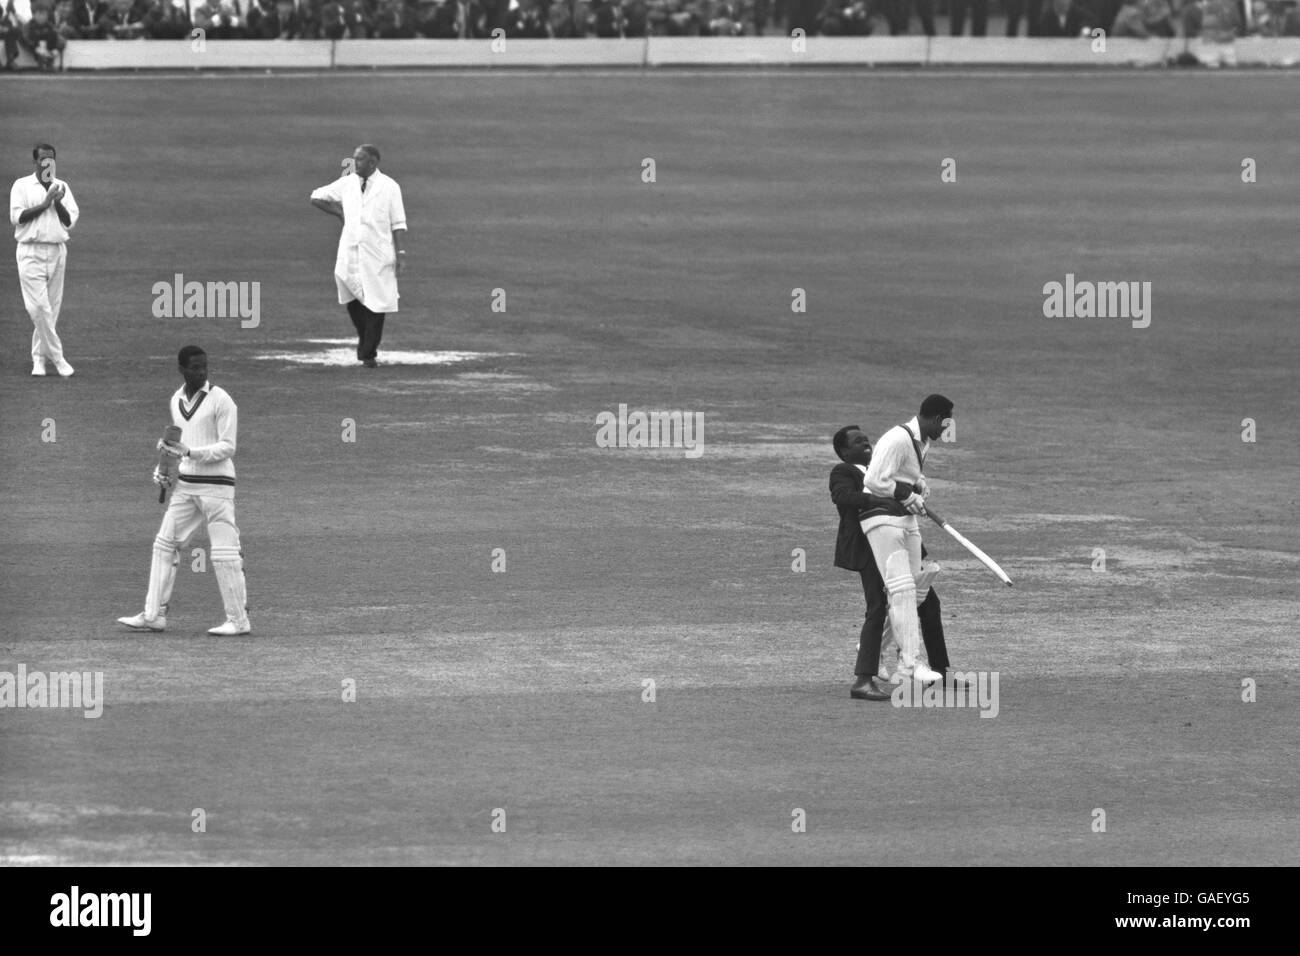 Sport - Cricket - England v West Indies - 2° prova a Lord - 1966 Foto Stock